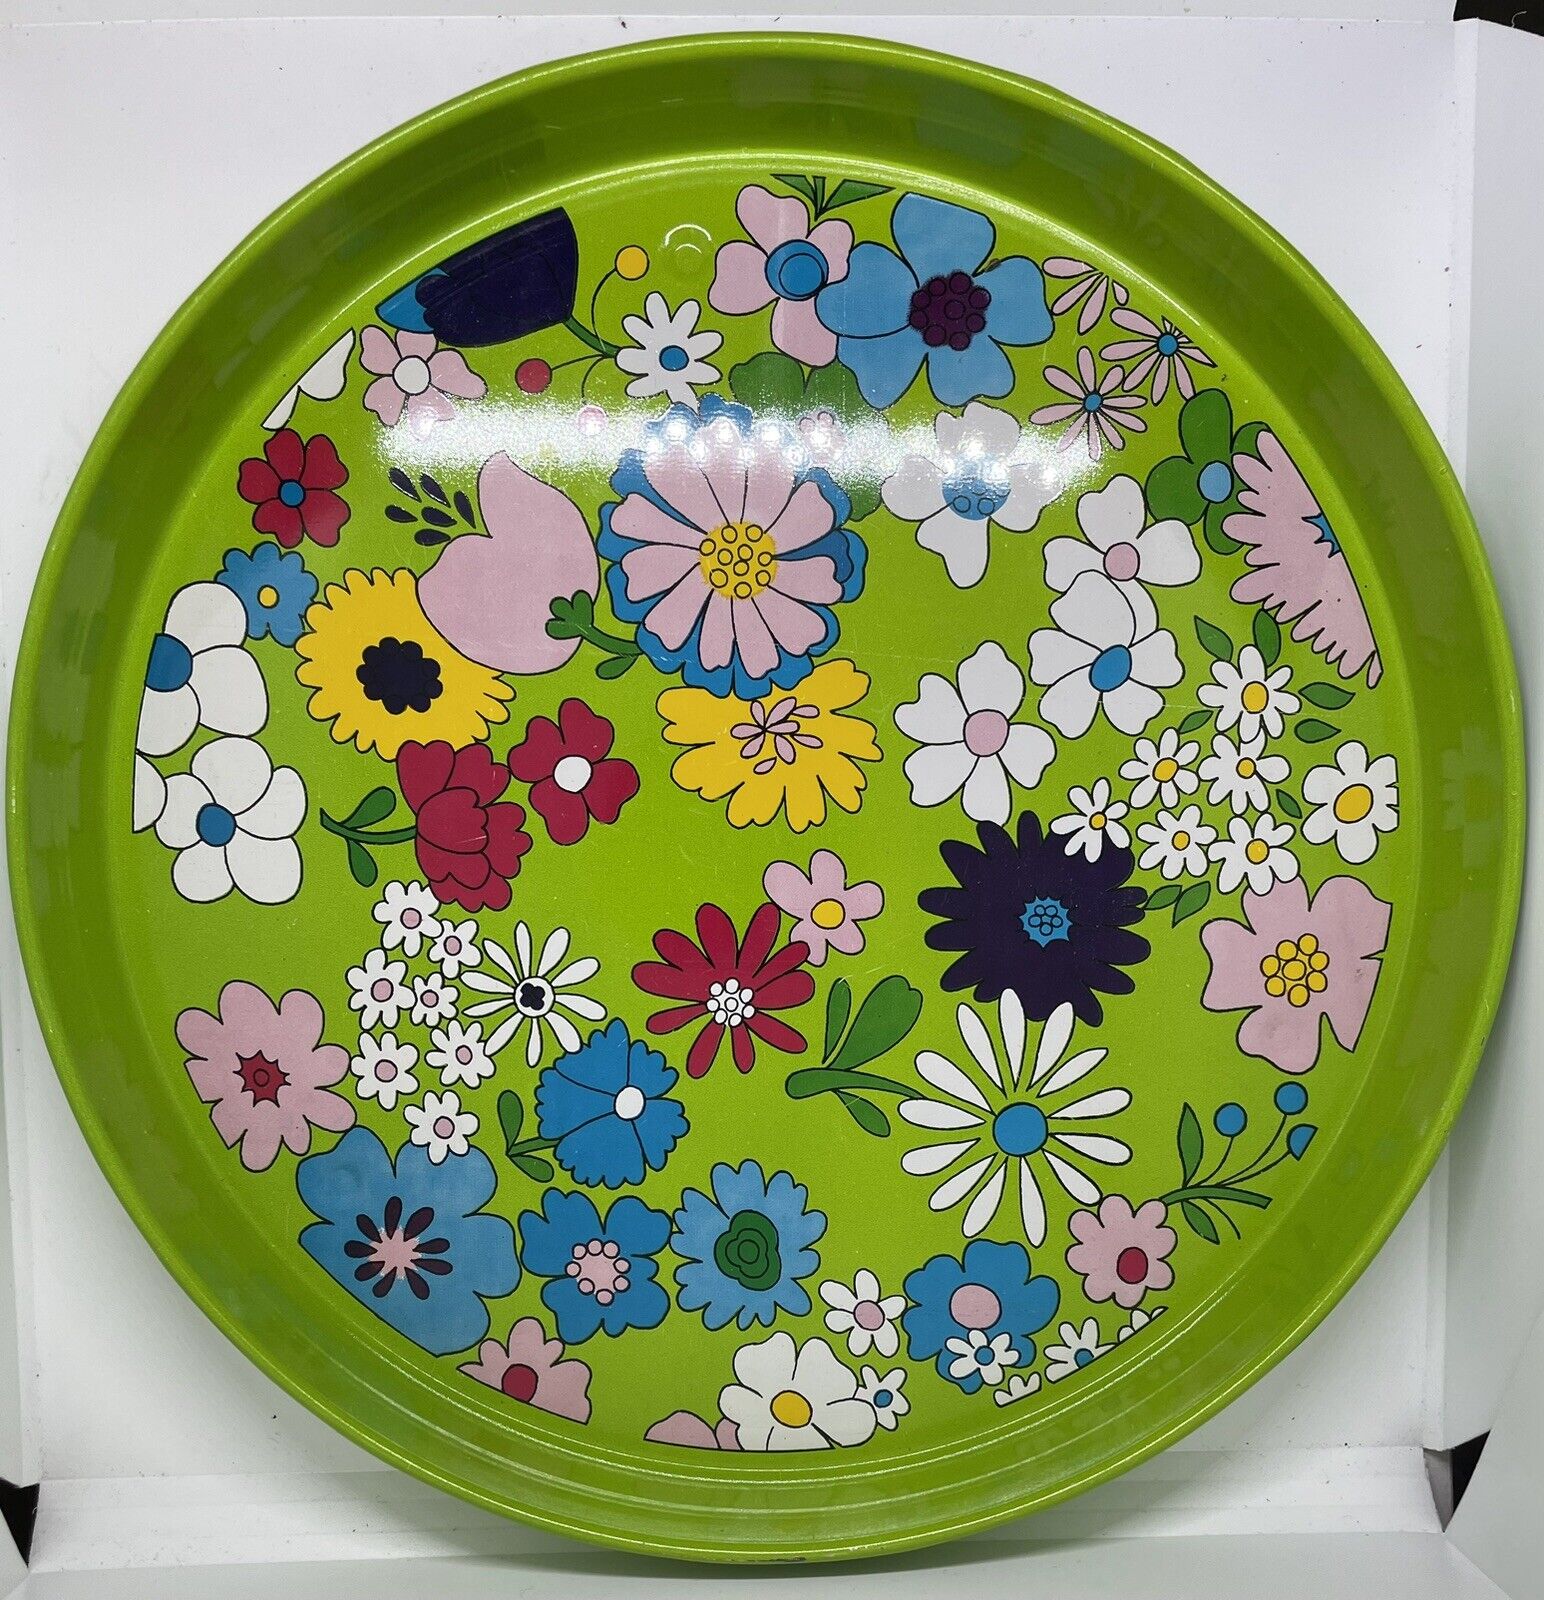 VINTAGE MID-CENTURY MOD BRIGHT GREEN ROUND FLORAL METAL SERVING TRAY 1960s/70s